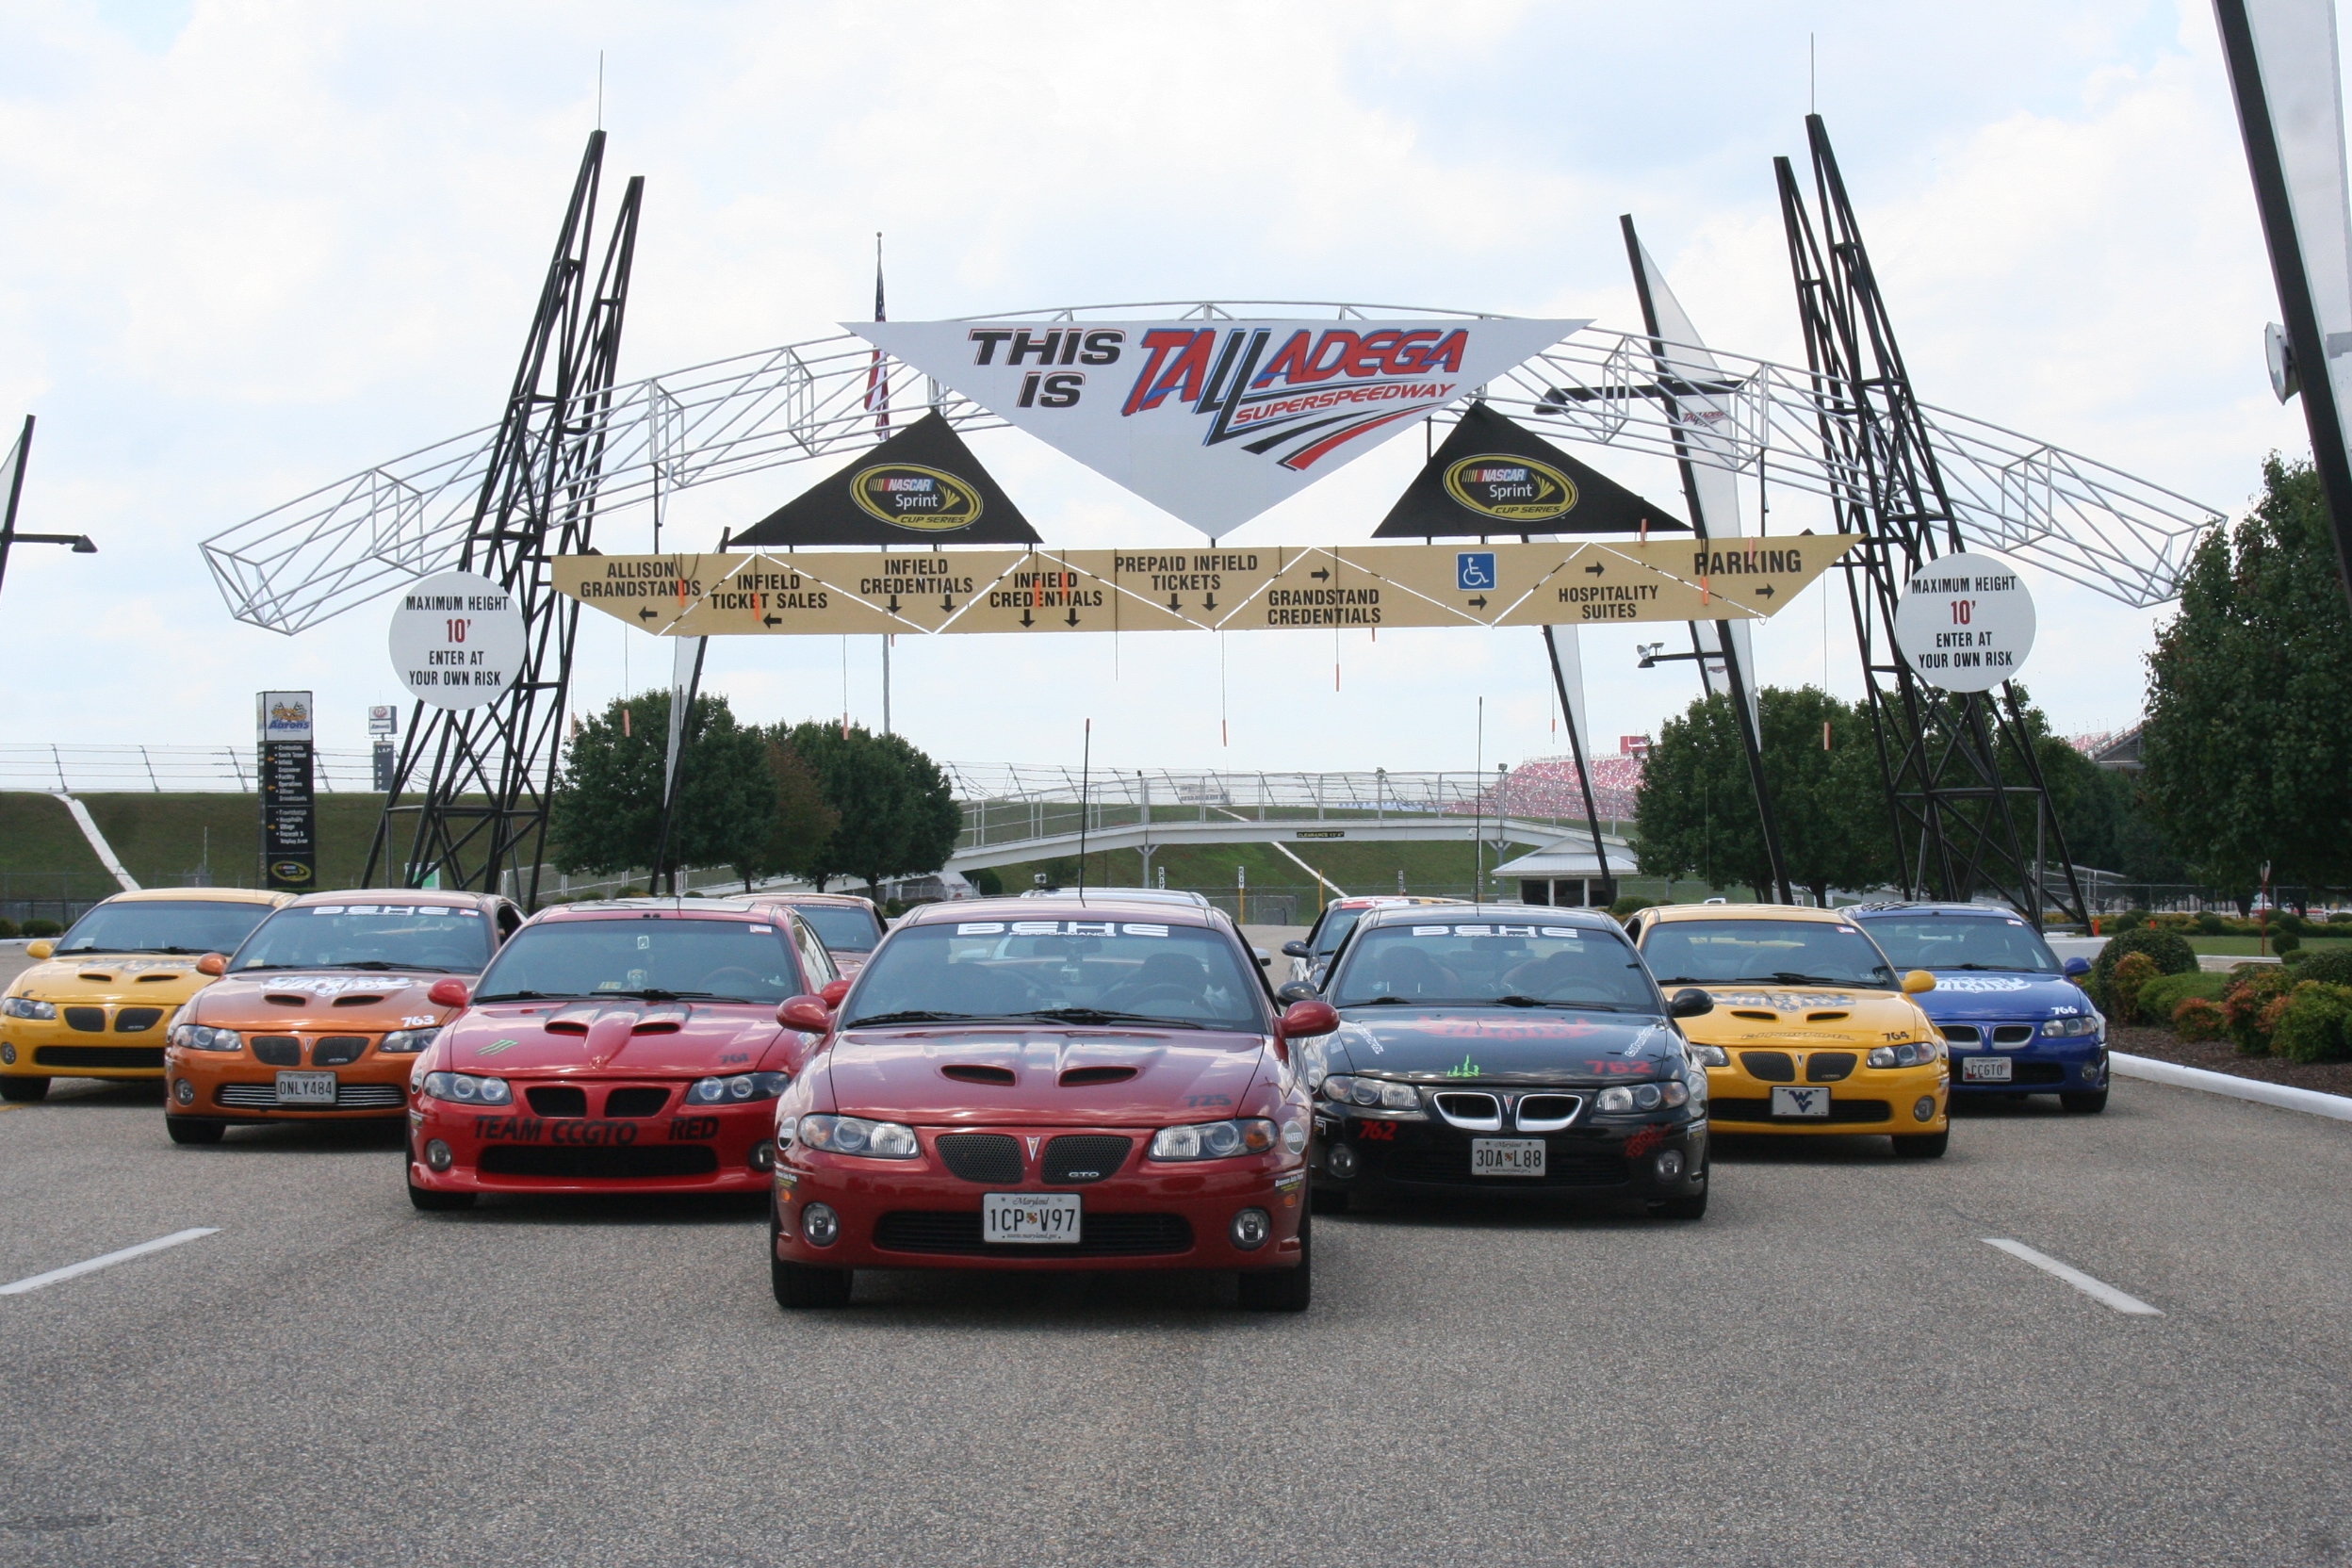 Off the 8s: Driving far for a good cause